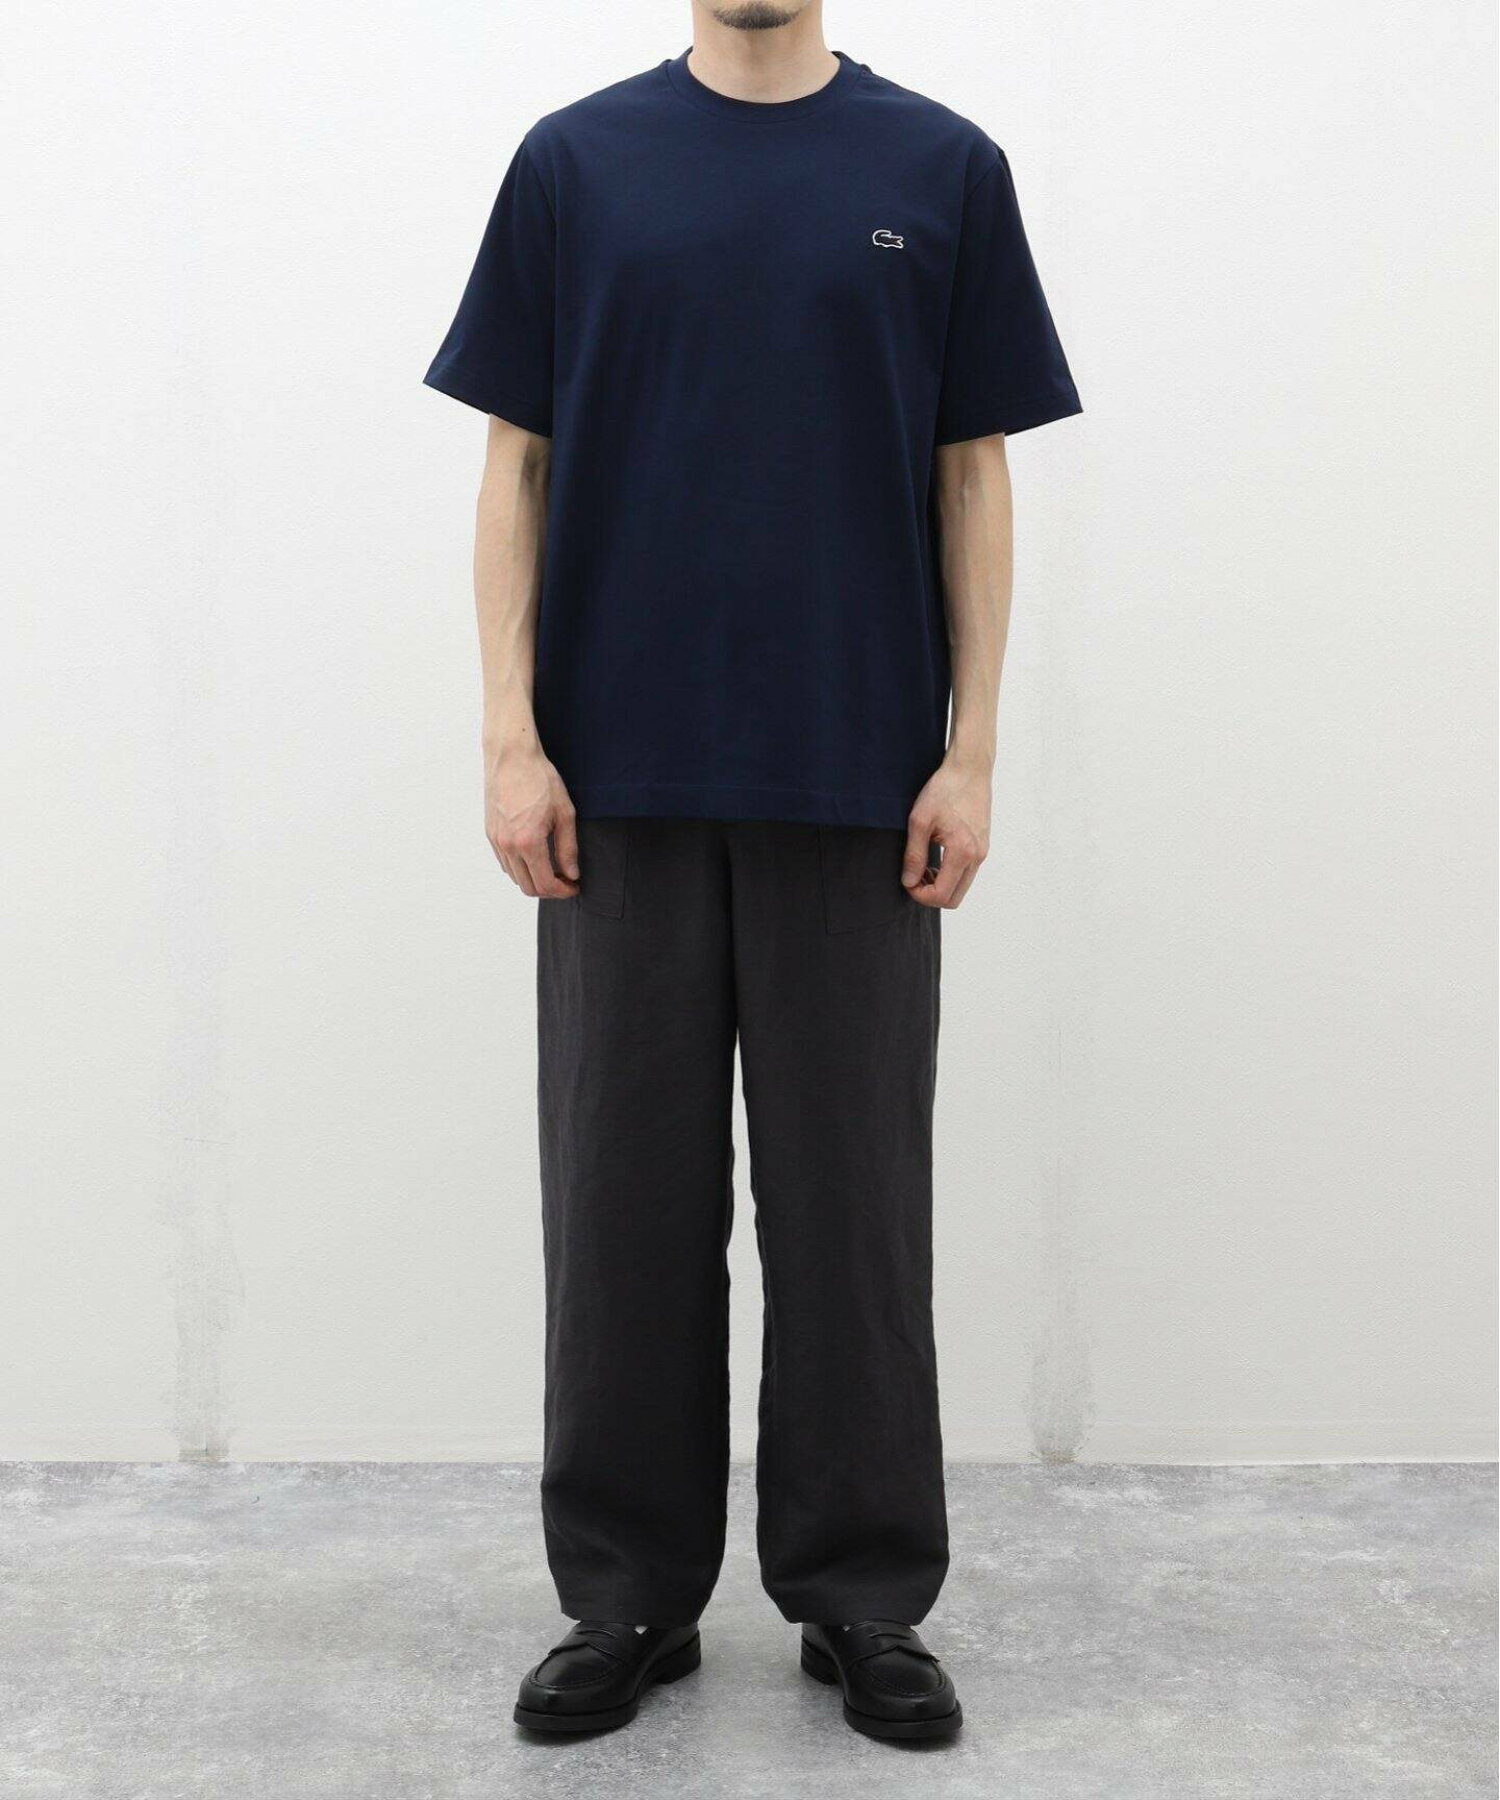 LACOSTE (ラコステ) Heavy Pique T-Shirt TH5830-99